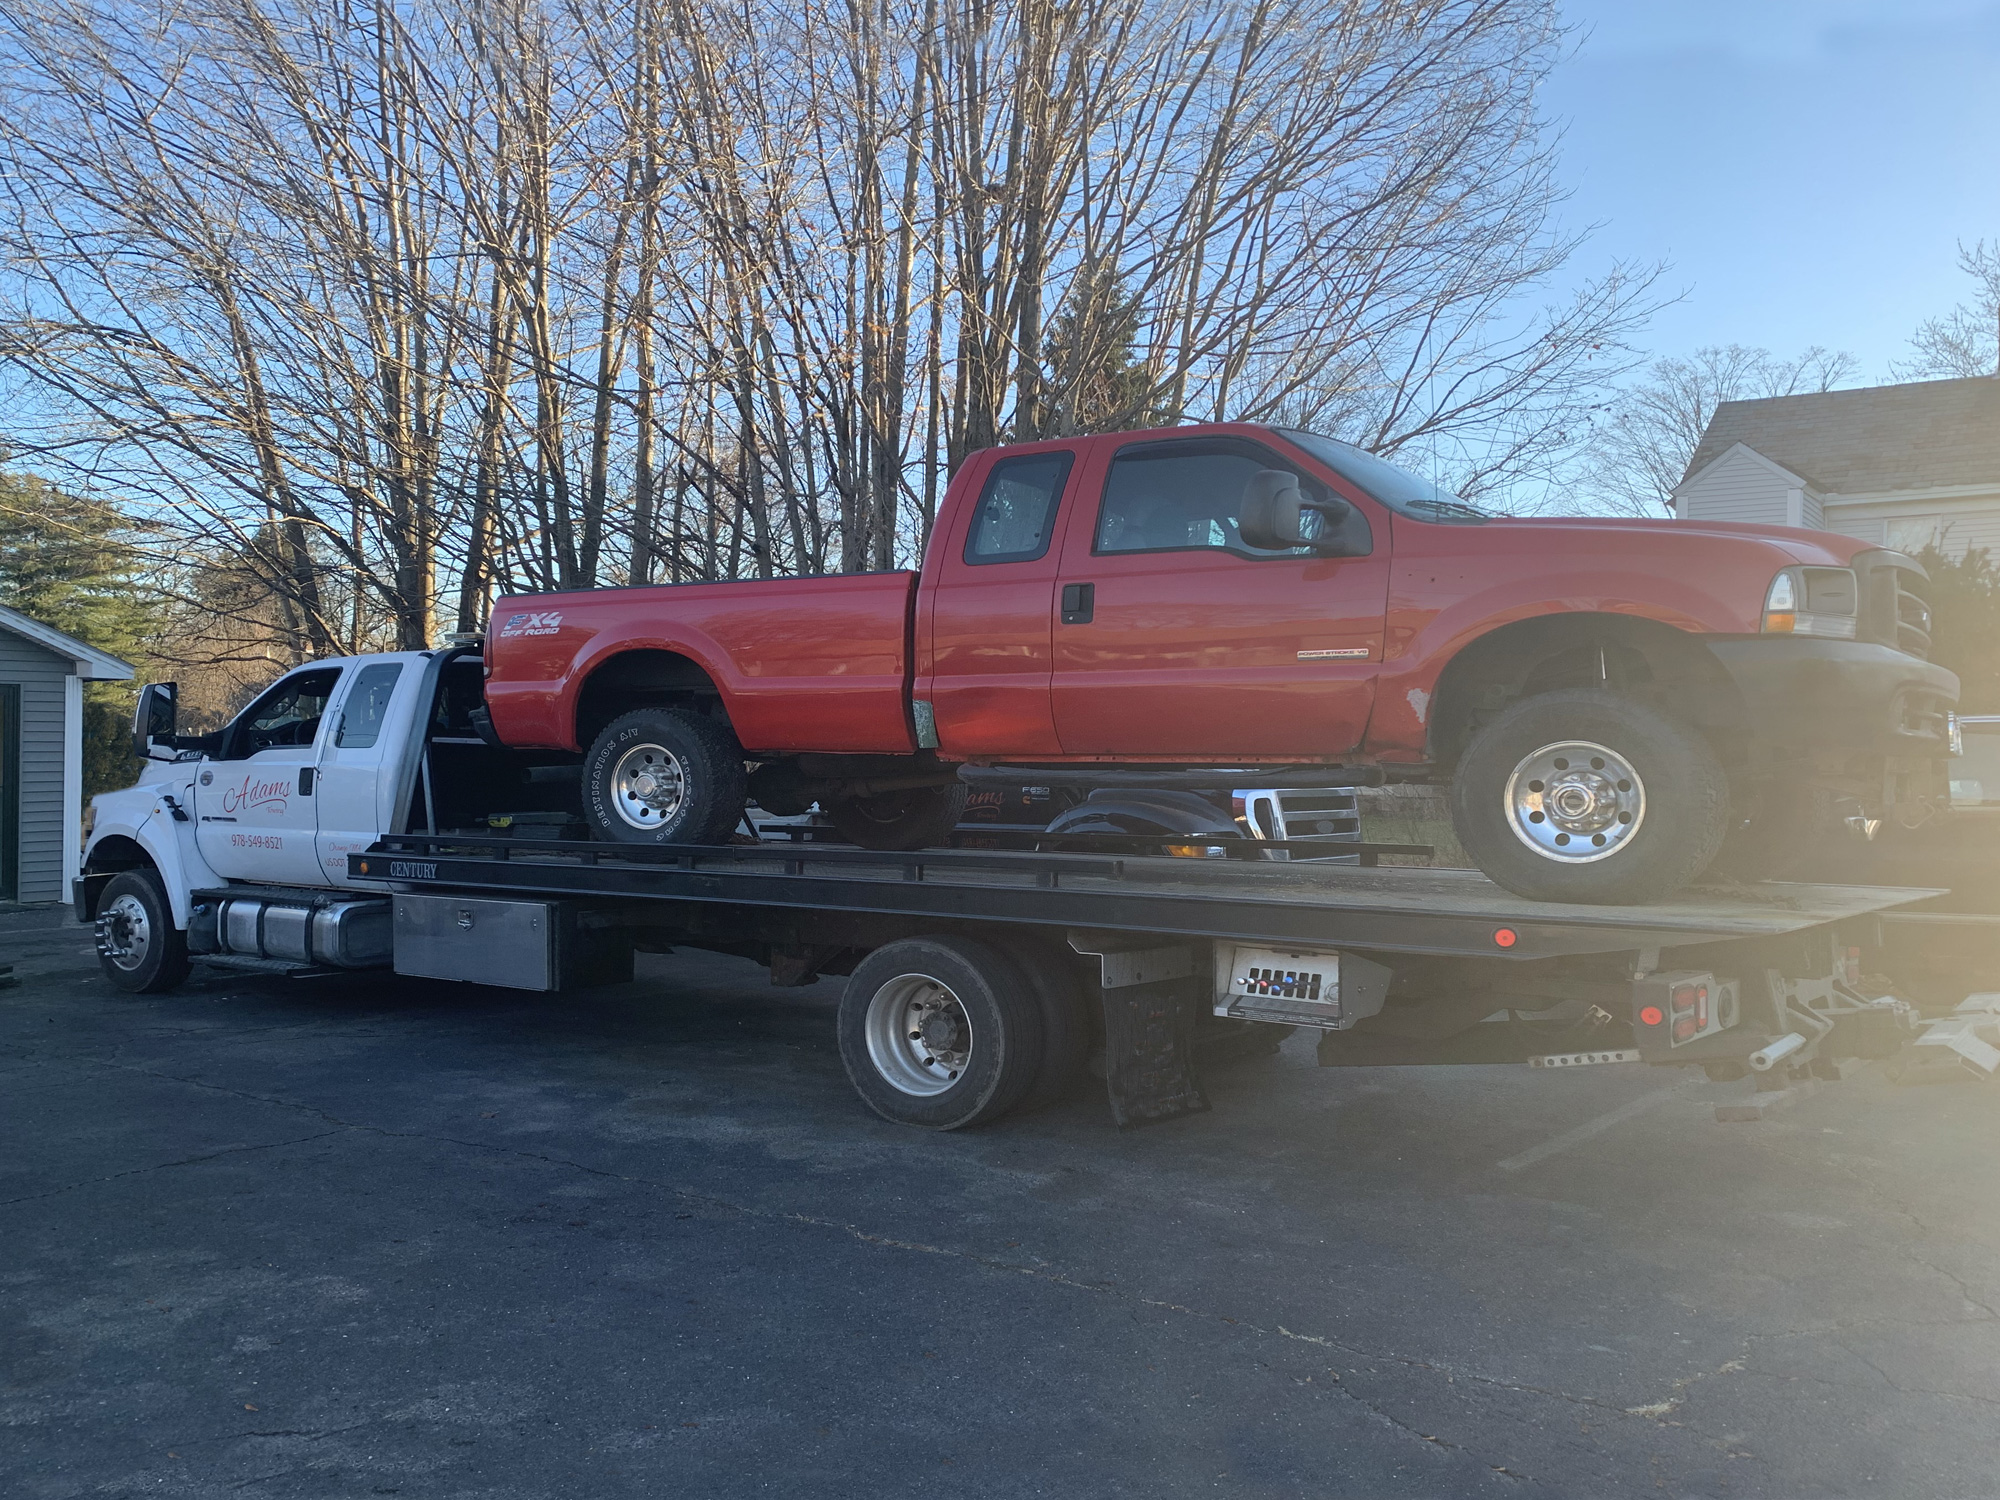 Towing chevy truck to dealership.